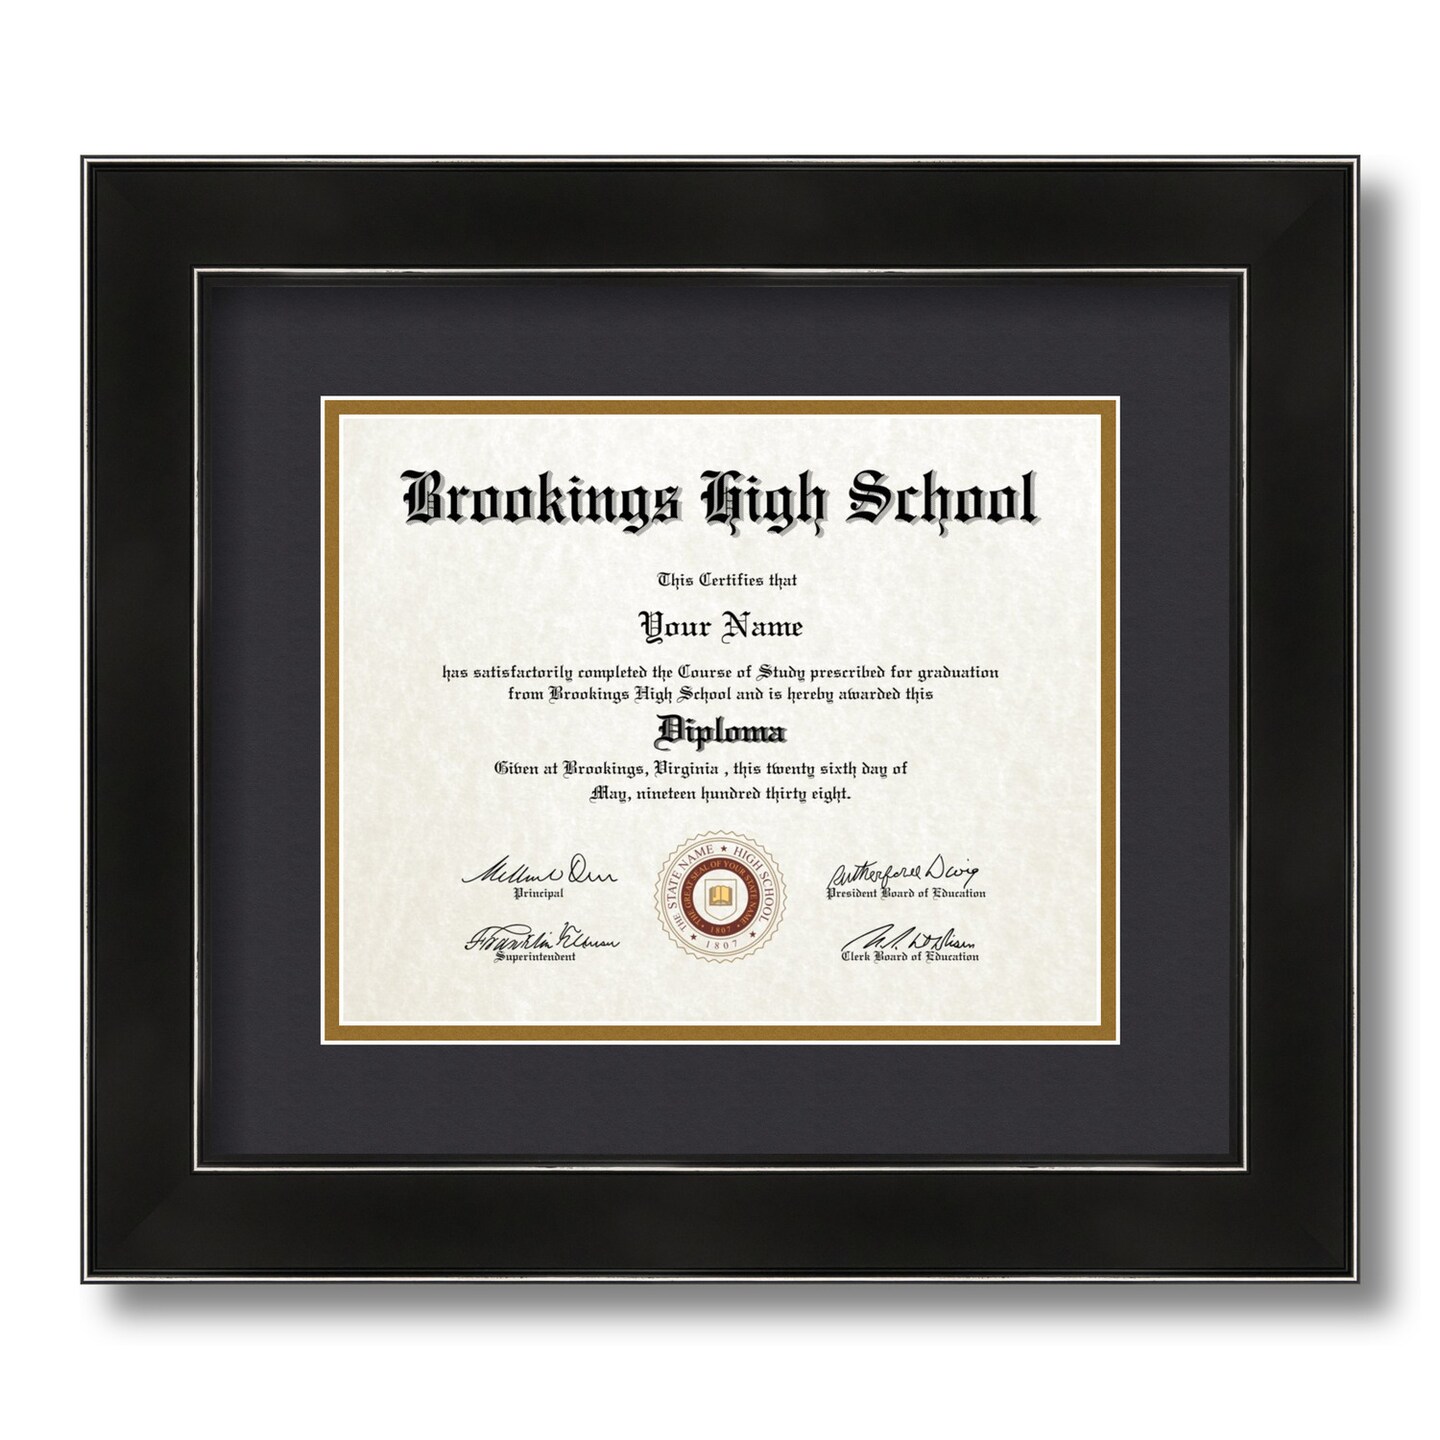 ArtToFrames 8x10 inch Diploma Frame - Framed with Black and Gold Mats, Comes with Regular Glass and Sawtooth Hanger for Wall Hanging (D-8x10)